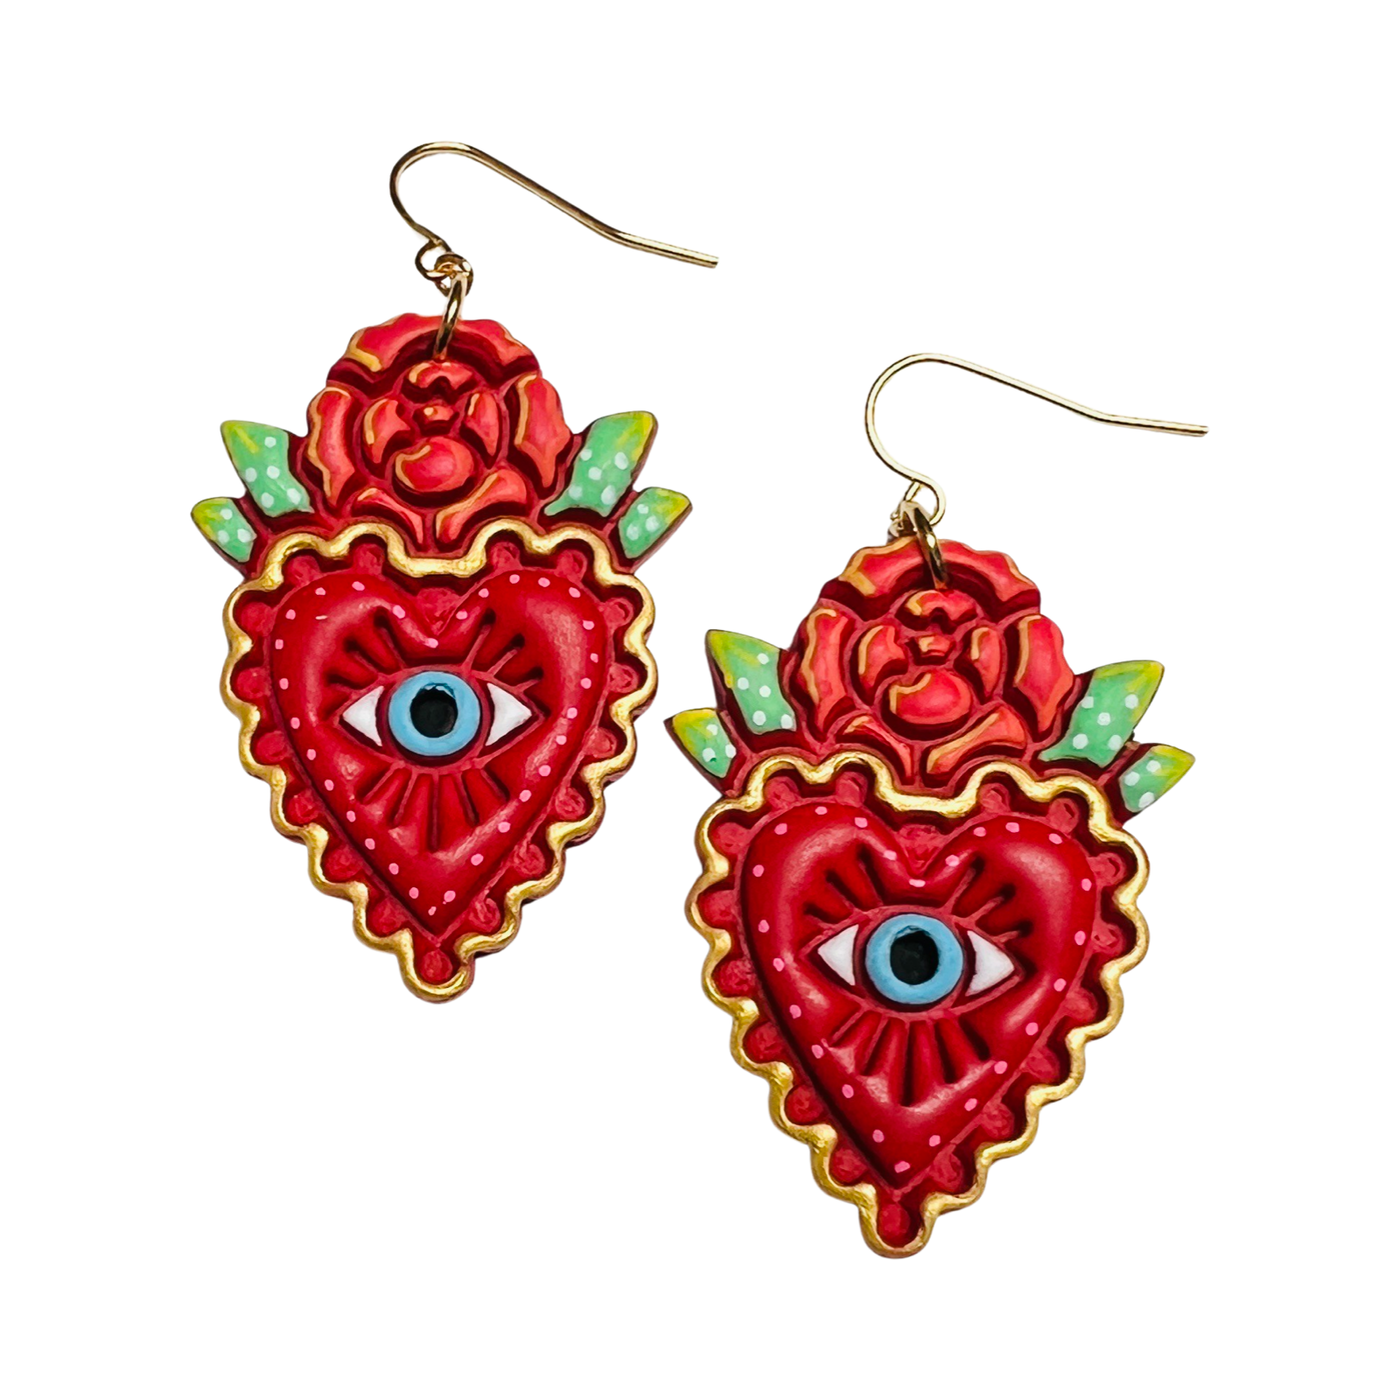 set of red hearts with a red rose on the top and features an eye in the center.